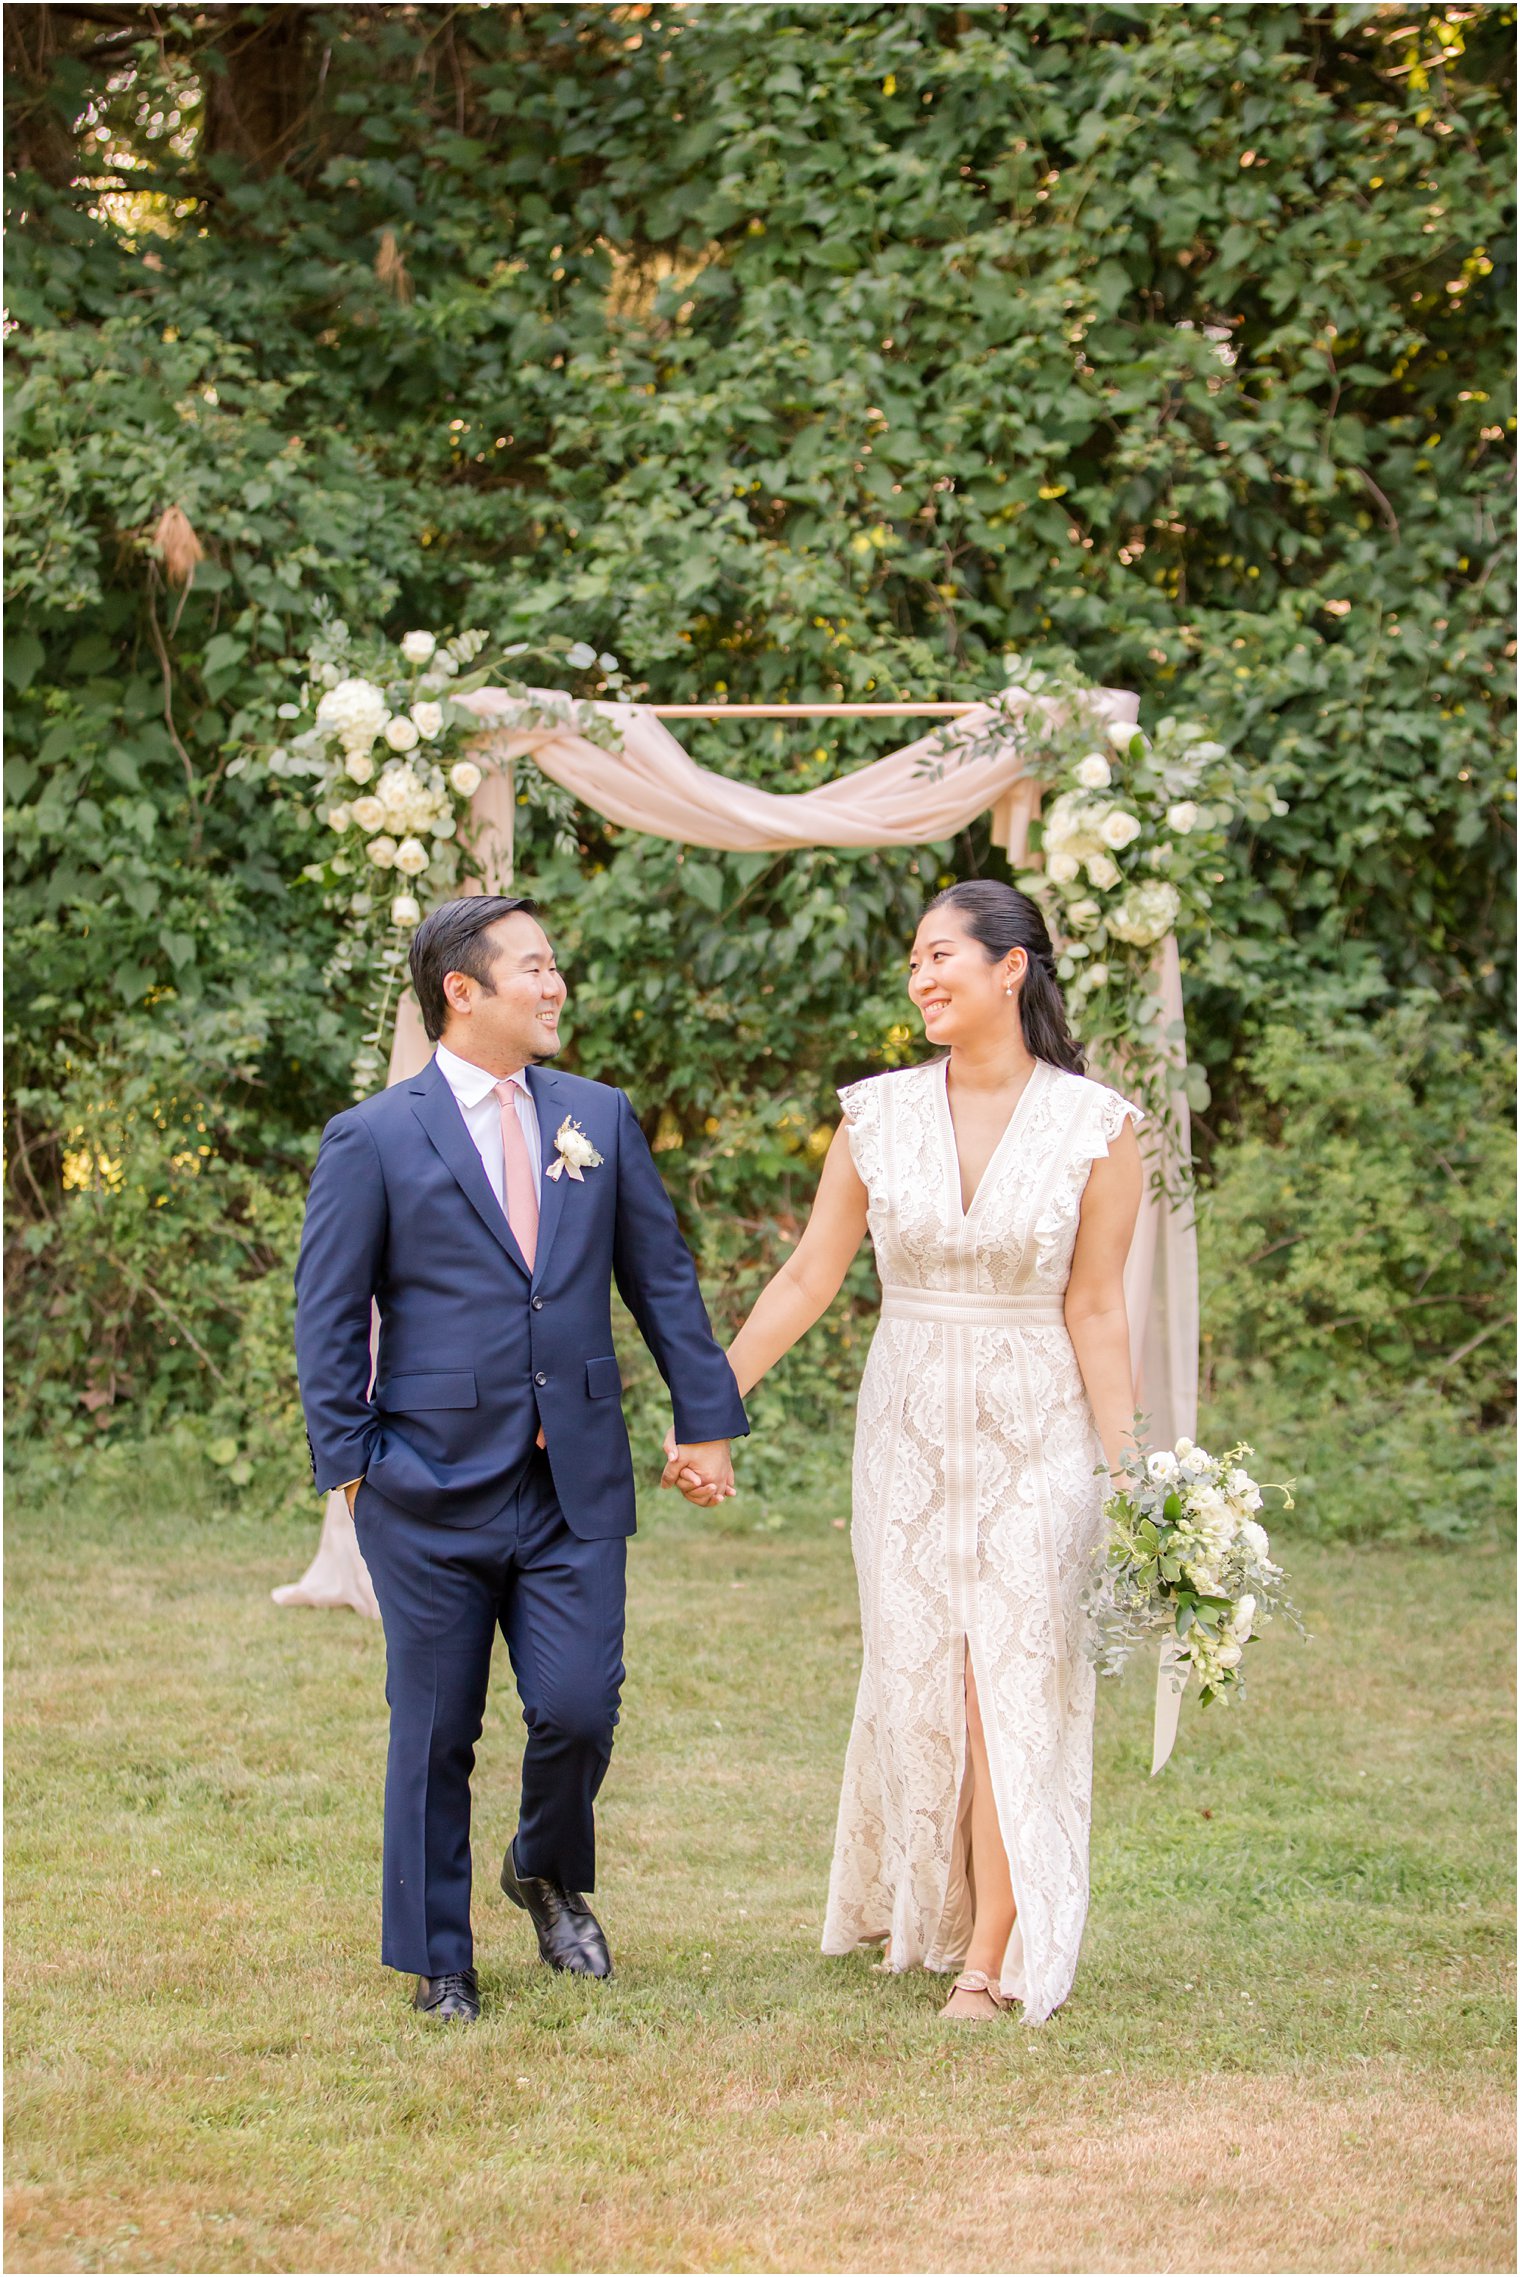 Bride and groom walking in front of a gorgeous floral arch